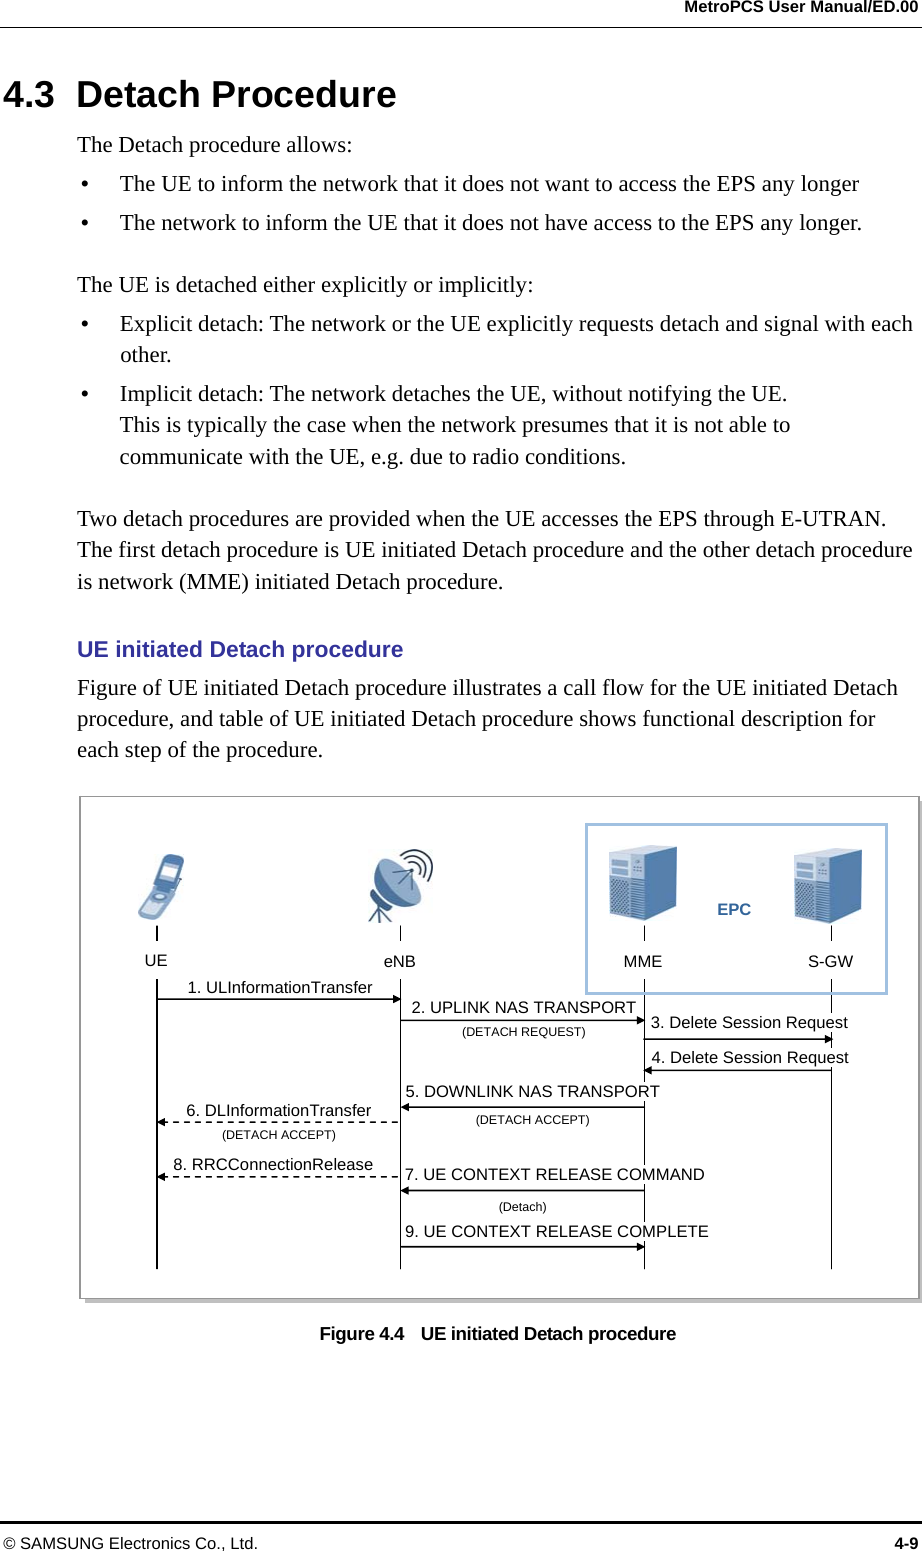  MetroPCS User Manual/ED.00 © SAMSUNG Electronics Co., Ltd.  4-9 4.3 Detach Procedure The Detach procedure allows:  The UE to inform the network that it does not want to access the EPS any longer  The network to inform the UE that it does not have access to the EPS any longer.  The UE is detached either explicitly or implicitly:  Explicit detach: The network or the UE explicitly requests detach and signal with each other.  Implicit detach: The network detaches the UE, without notifying the UE. This is typically the case when the network presumes that it is not able to communicate with the UE, e.g. due to radio conditions.  Two detach procedures are provided when the UE accesses the EPS through E-UTRAN. The first detach procedure is UE initiated Detach procedure and the other detach procedure is network (MME) initiated Detach procedure.  UE initiated Detach procedure Figure of UE initiated Detach procedure illustrates a call flow for the UE initiated Detach procedure, and table of UE initiated Detach procedure shows functional description for each step of the procedure.  Figure 4.4    UE initiated Detach procedure UE  eNB MME  S-GW EPC 1. ULInformationTransfer 3. Delete Session Request 2. UPLINK NAS TRANSPORT (DETACH REQUEST) 4. Delete Session Request 5. DOWNLINK NAS TRANSPORT (DETACH ACCEPT) 7. UE CONTEXT RELEASE COMMAND 9. UE CONTEXT RELEASE COMPLETE 6. DLInformationTransfer (DETACH ACCEPT) 8. RRCConnectionRelease (Detach) 